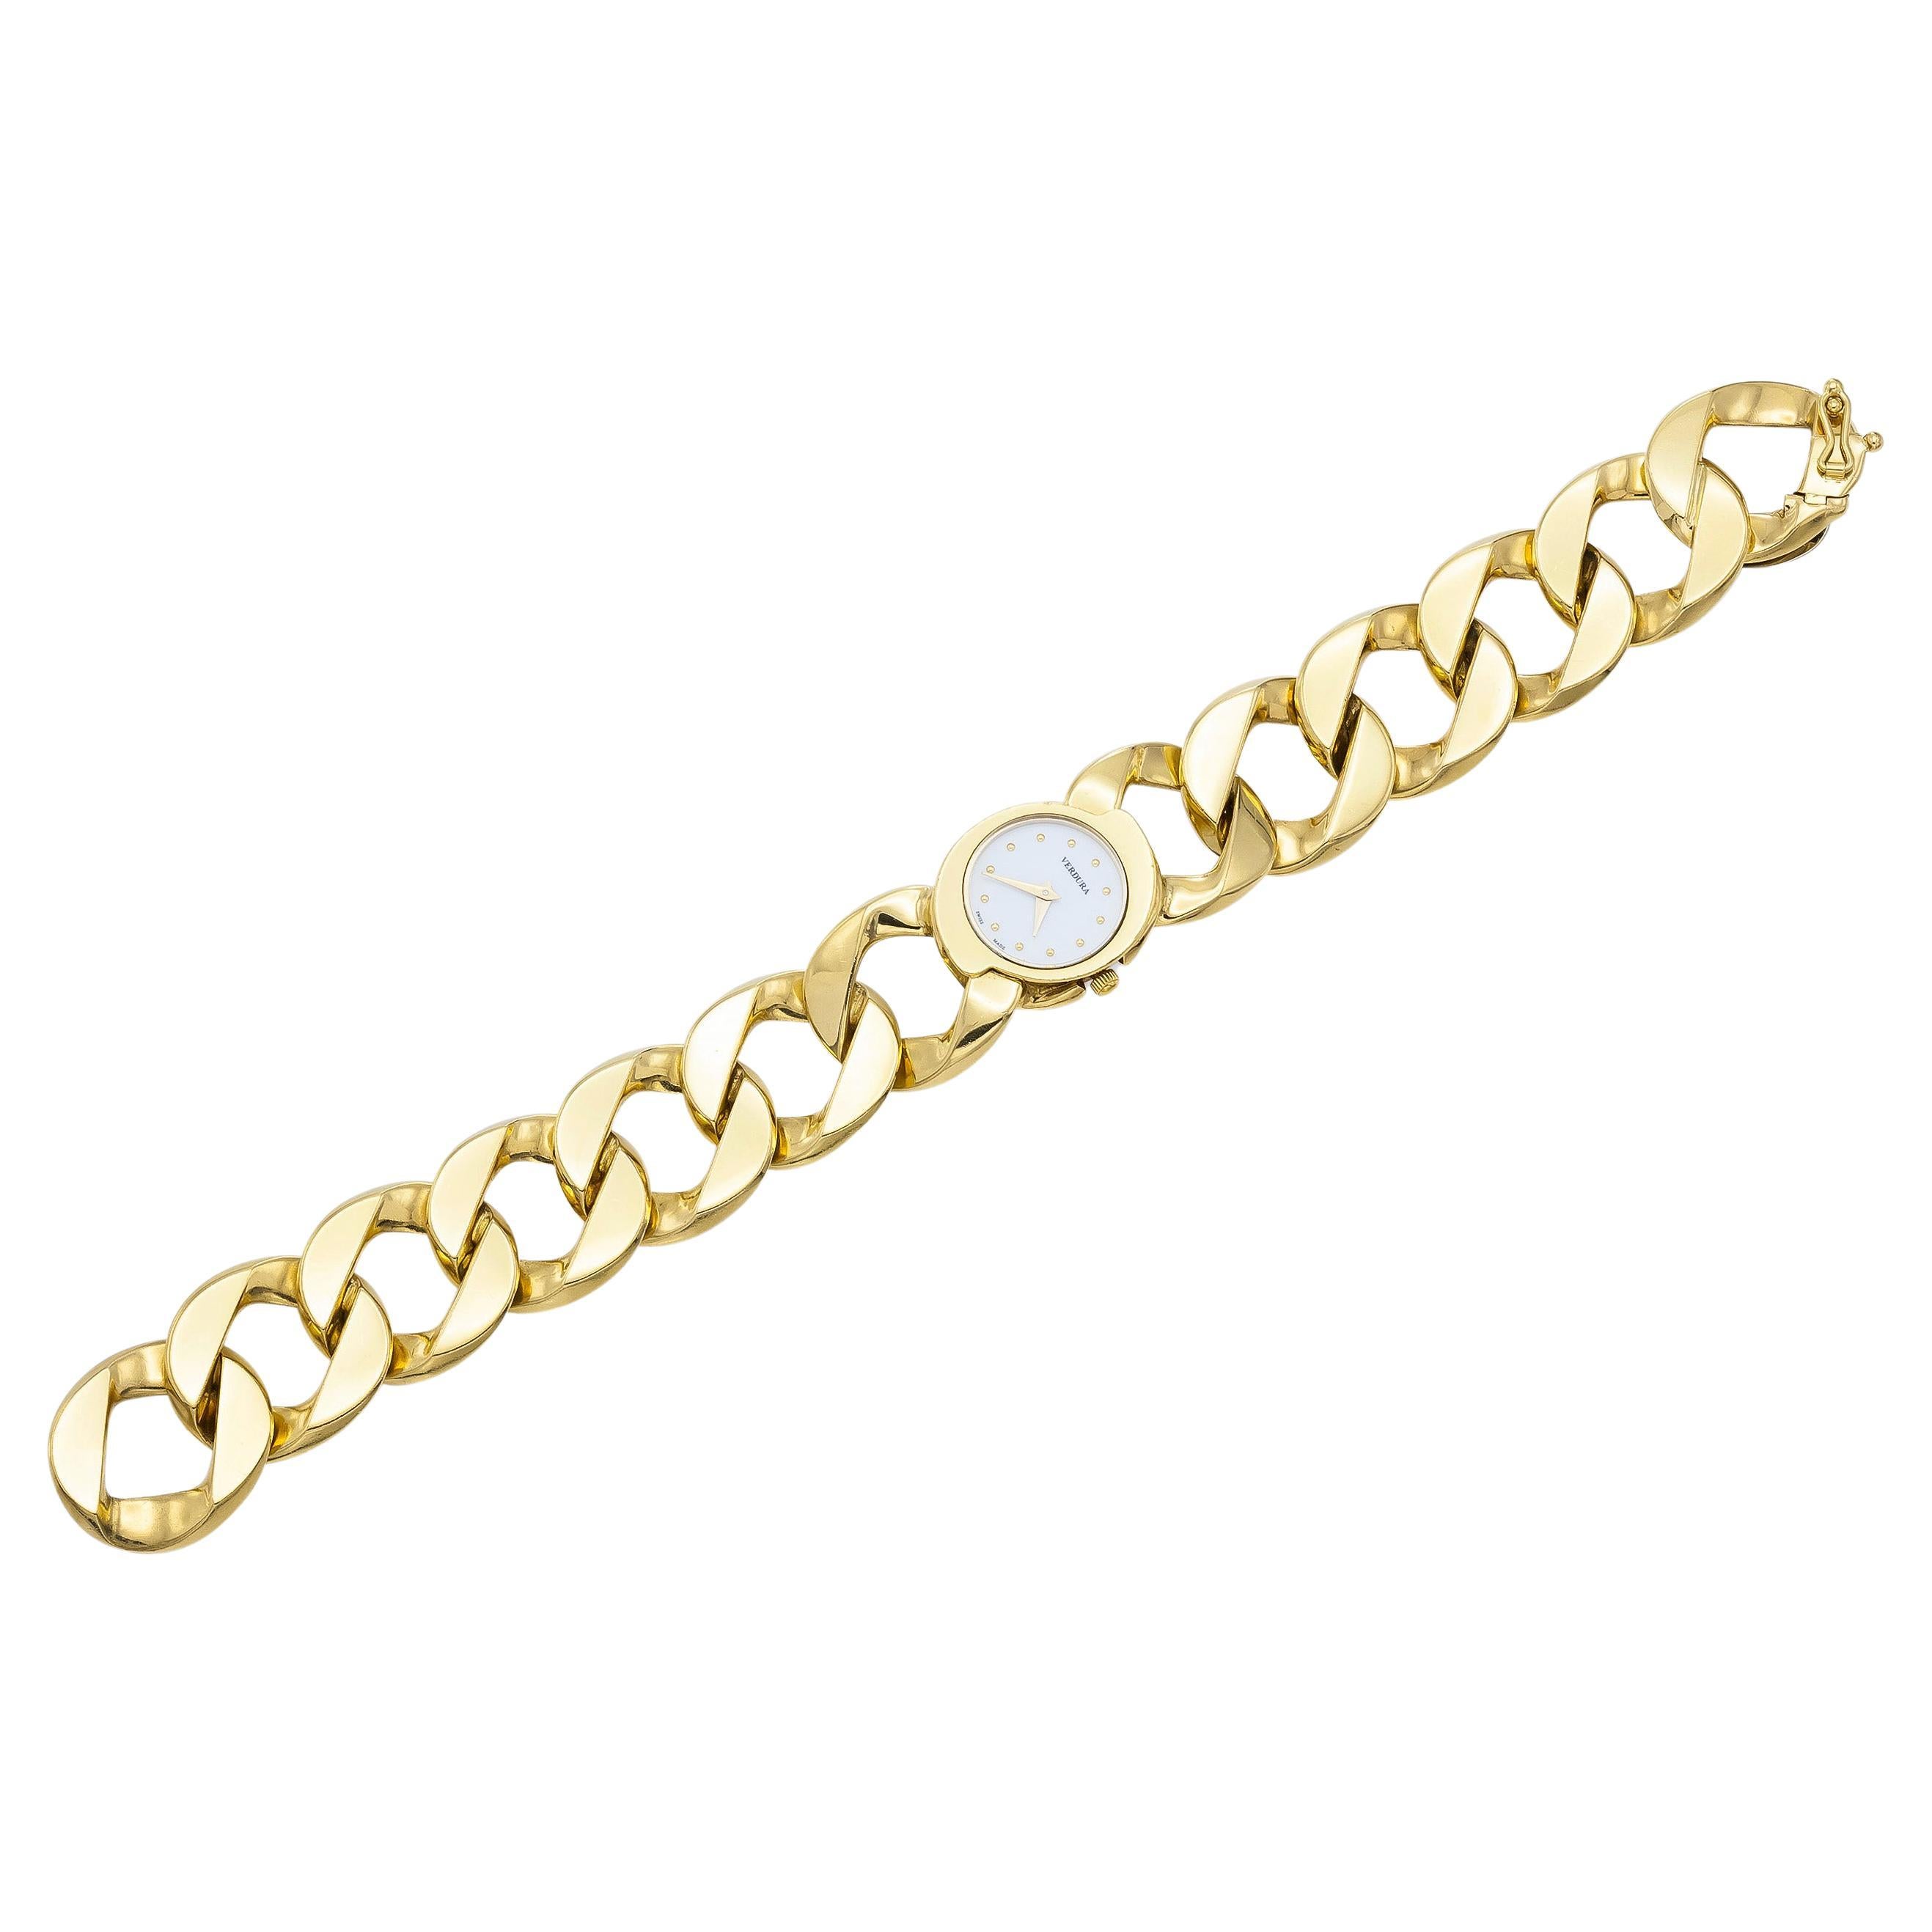 Iconic curb link bracelet design with watch crafted in 18K yellow gold. Signed by Verdura.